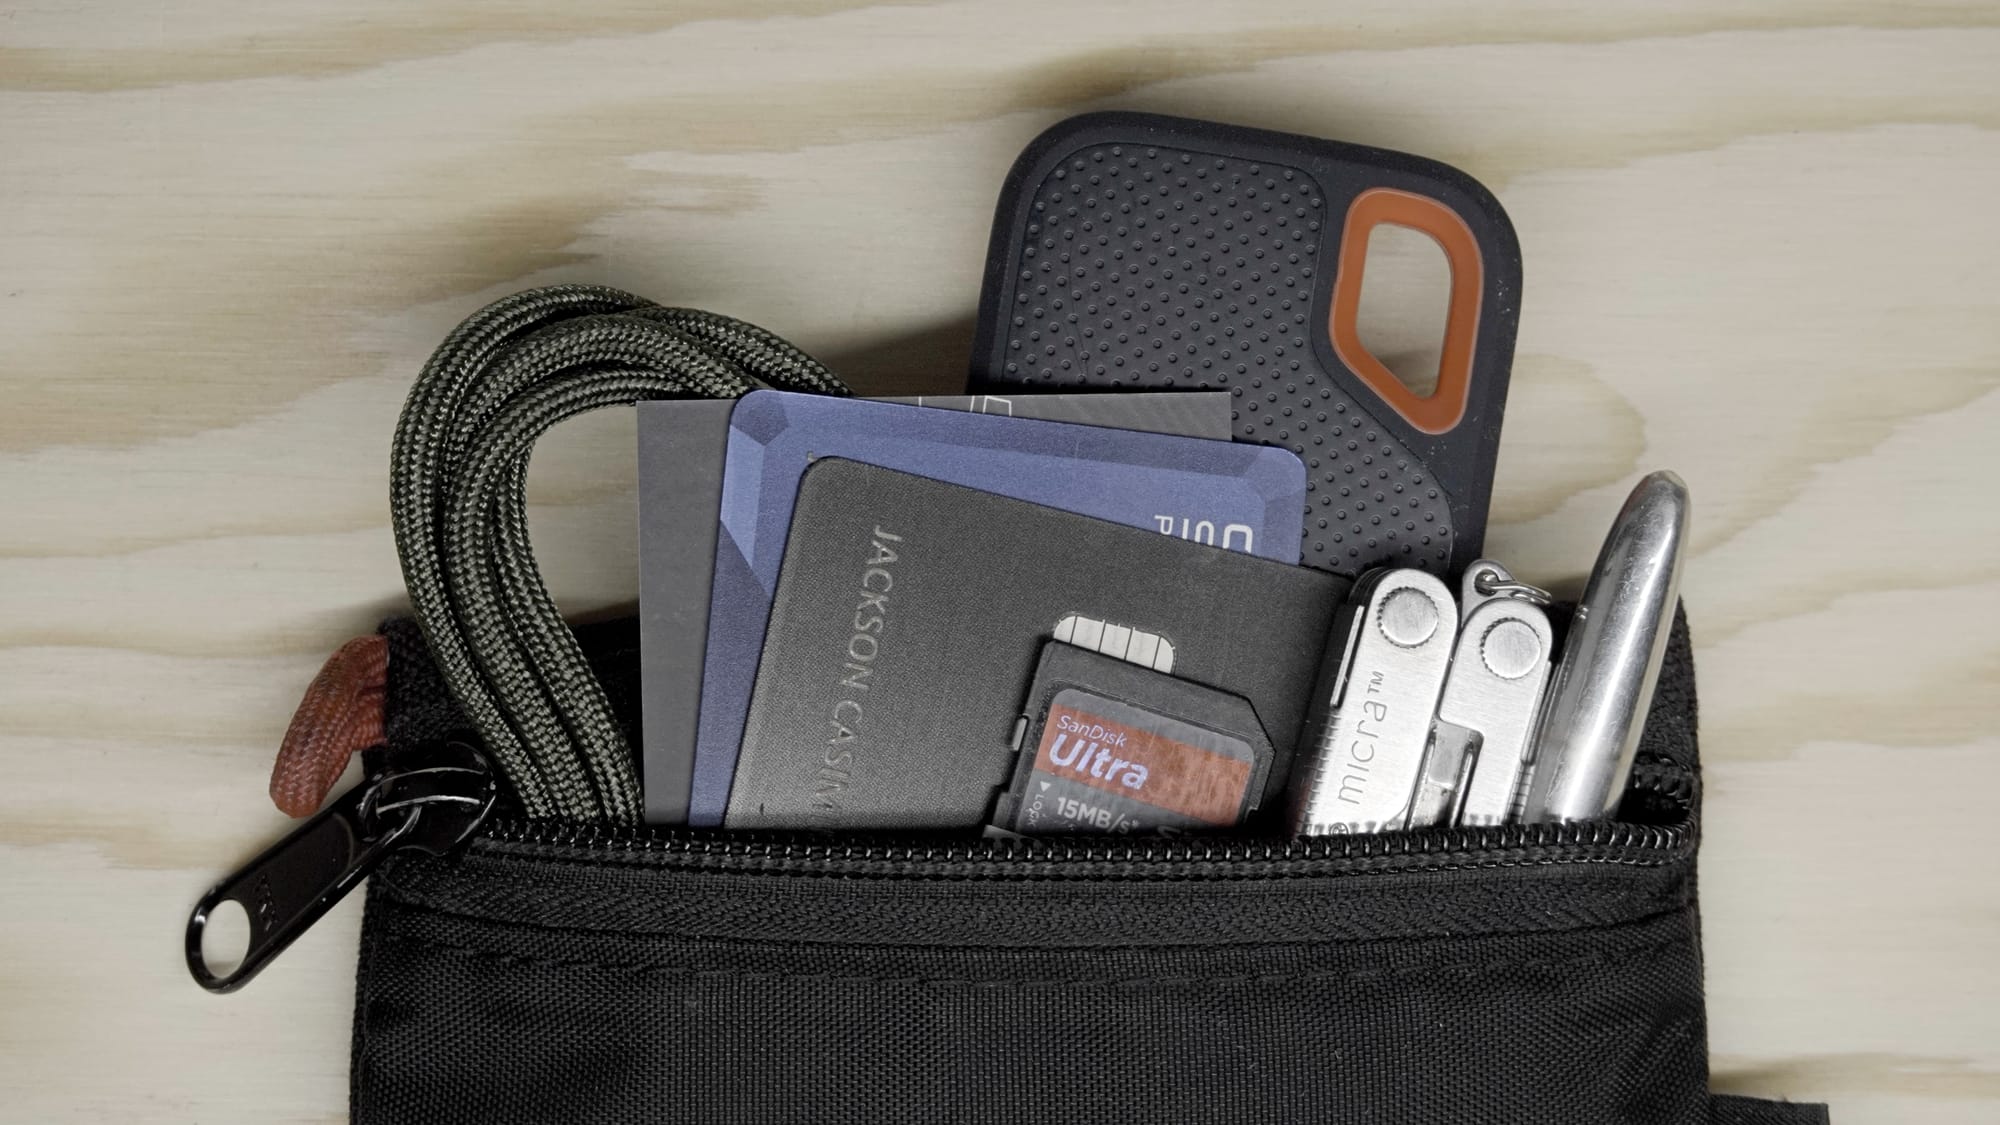 The Ultimate EDC is This Tiny Bag